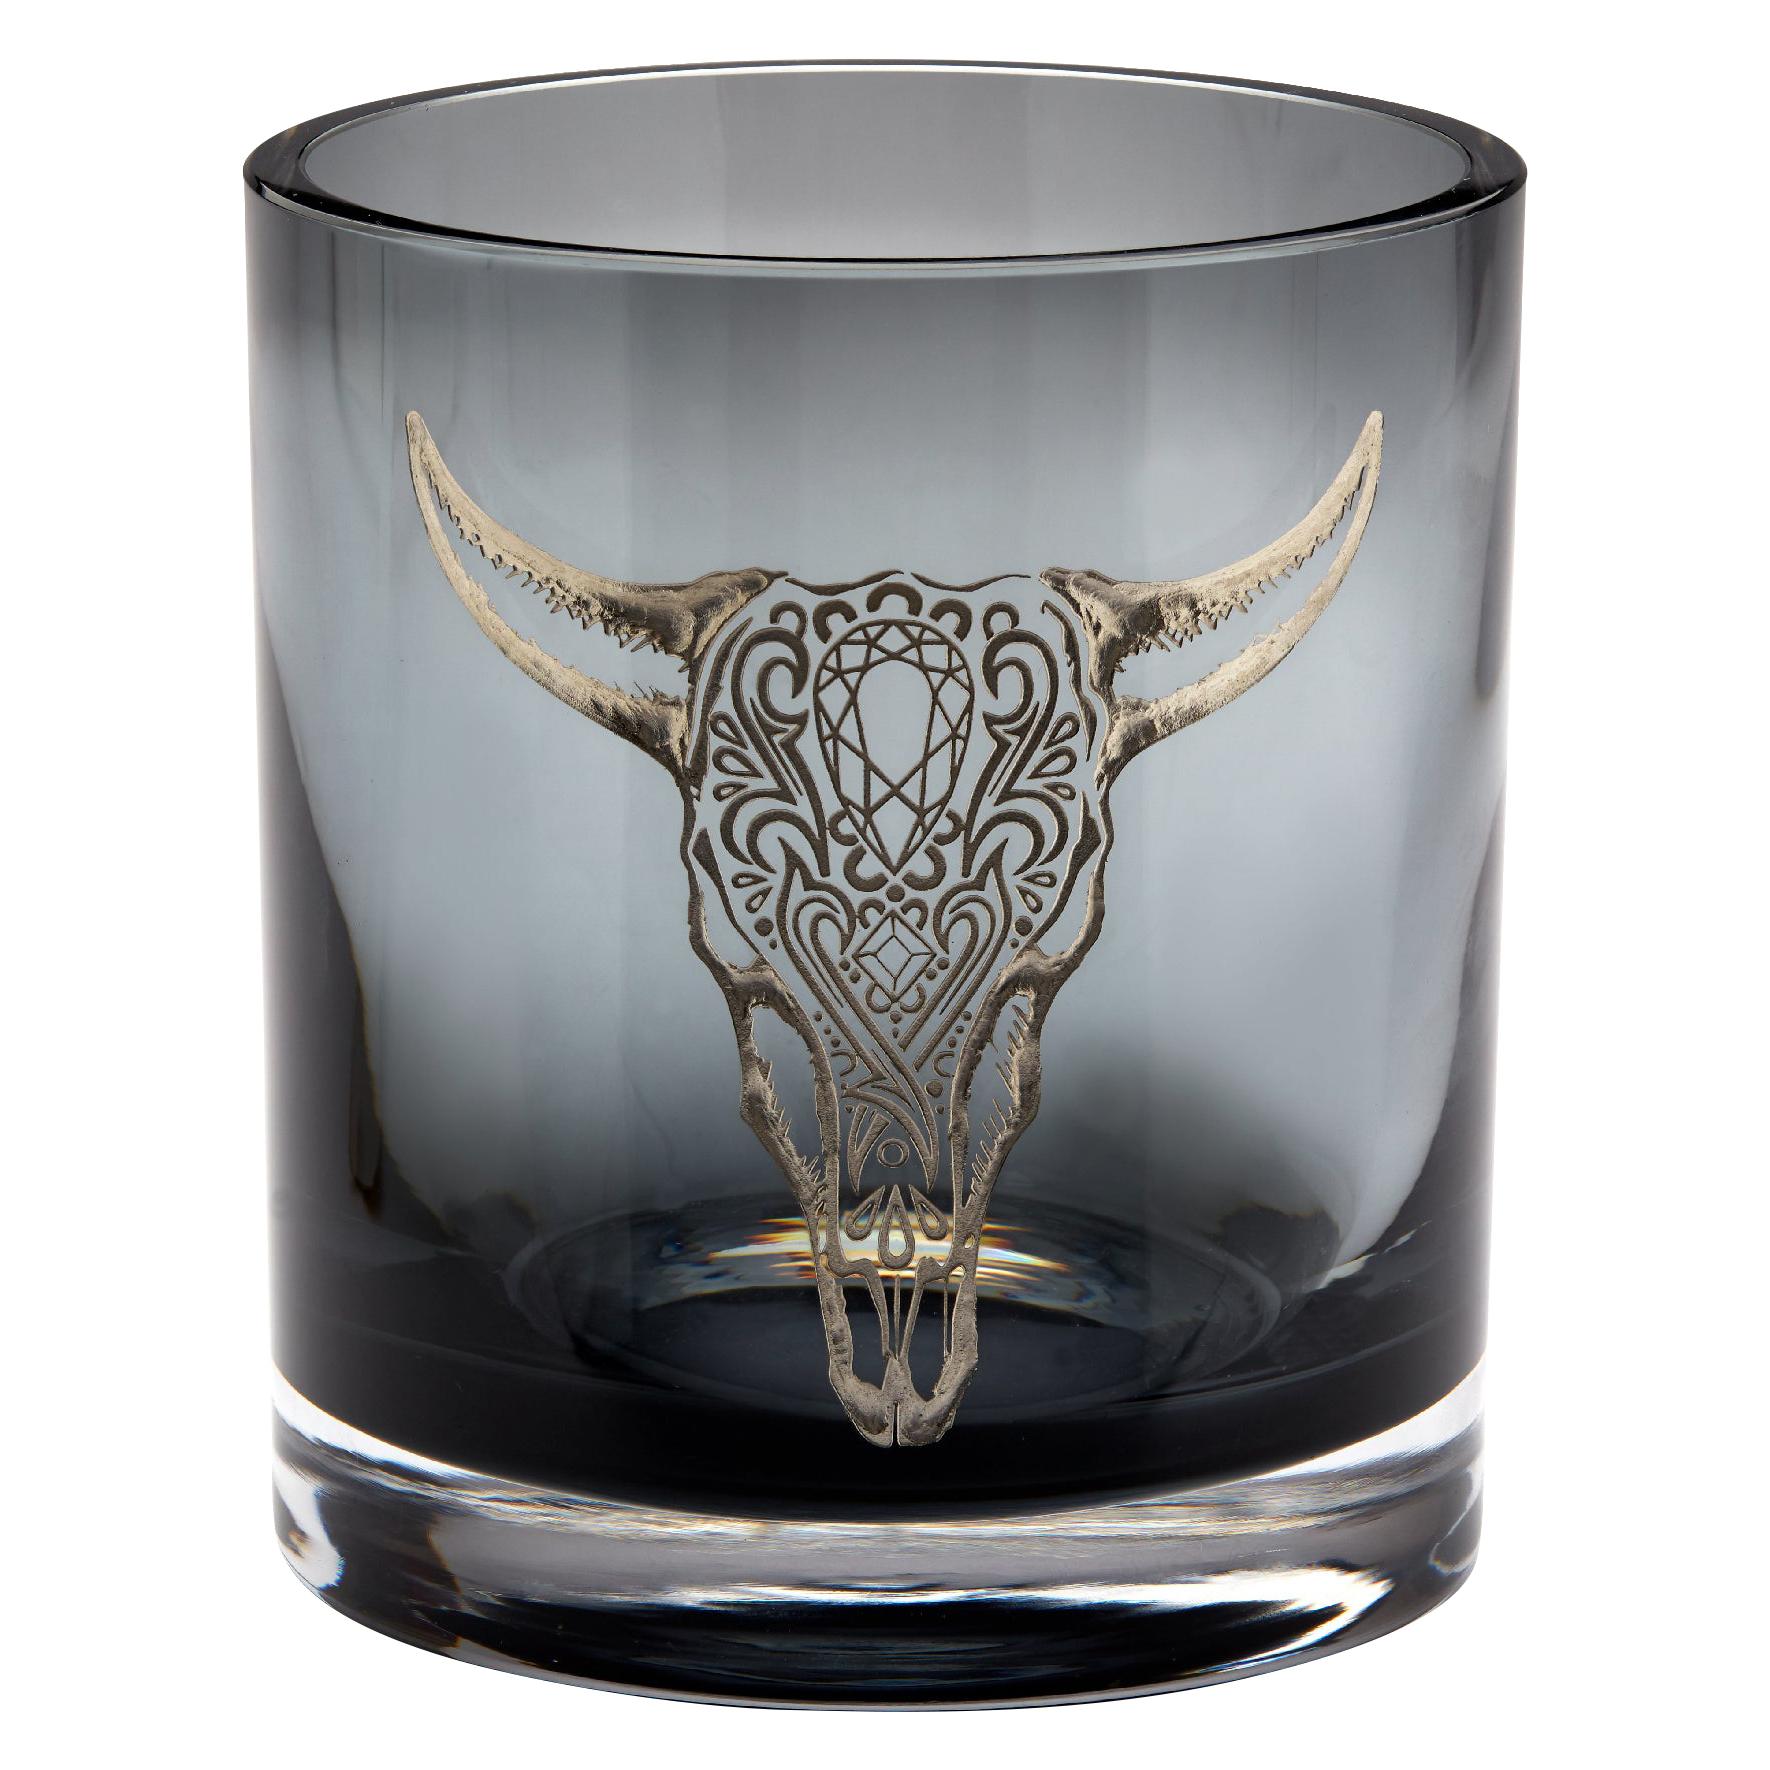 Stephen Webster Tequila Lore Cow Engraved Detail Smoke Colored Ice Bucket For Sale